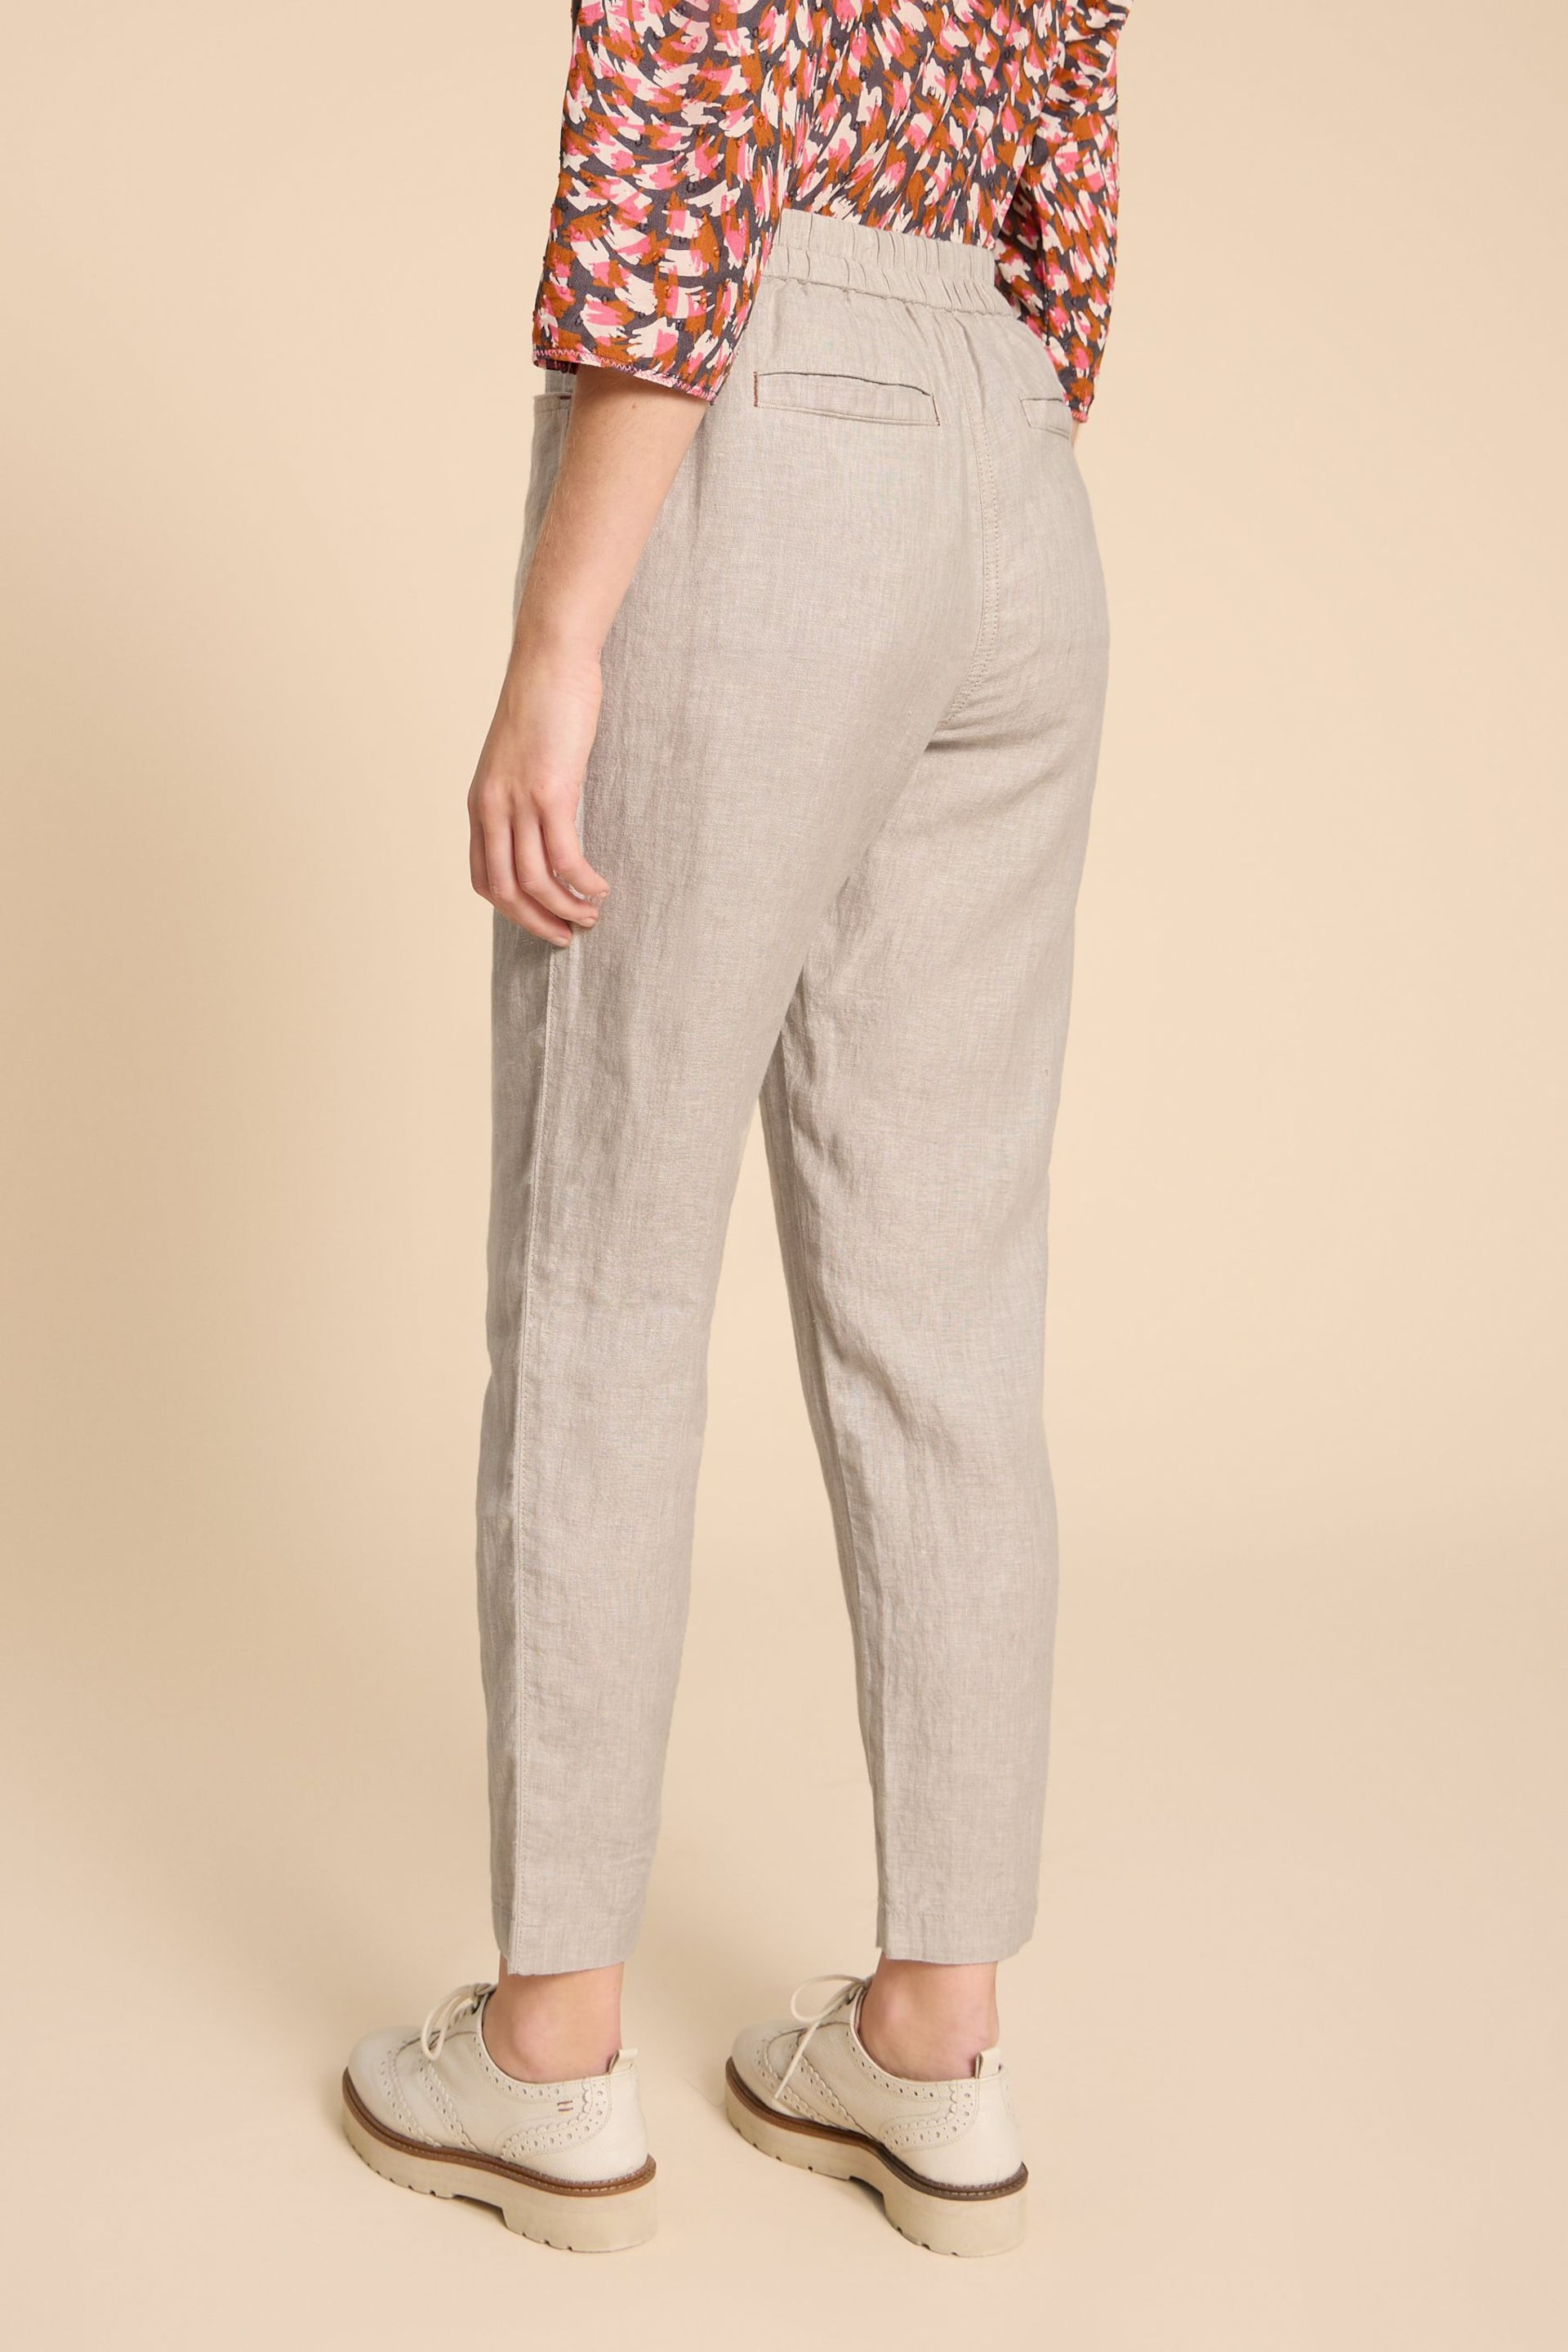 White Stuff Natural Rowena Linen Trousers - Image 2 of 4